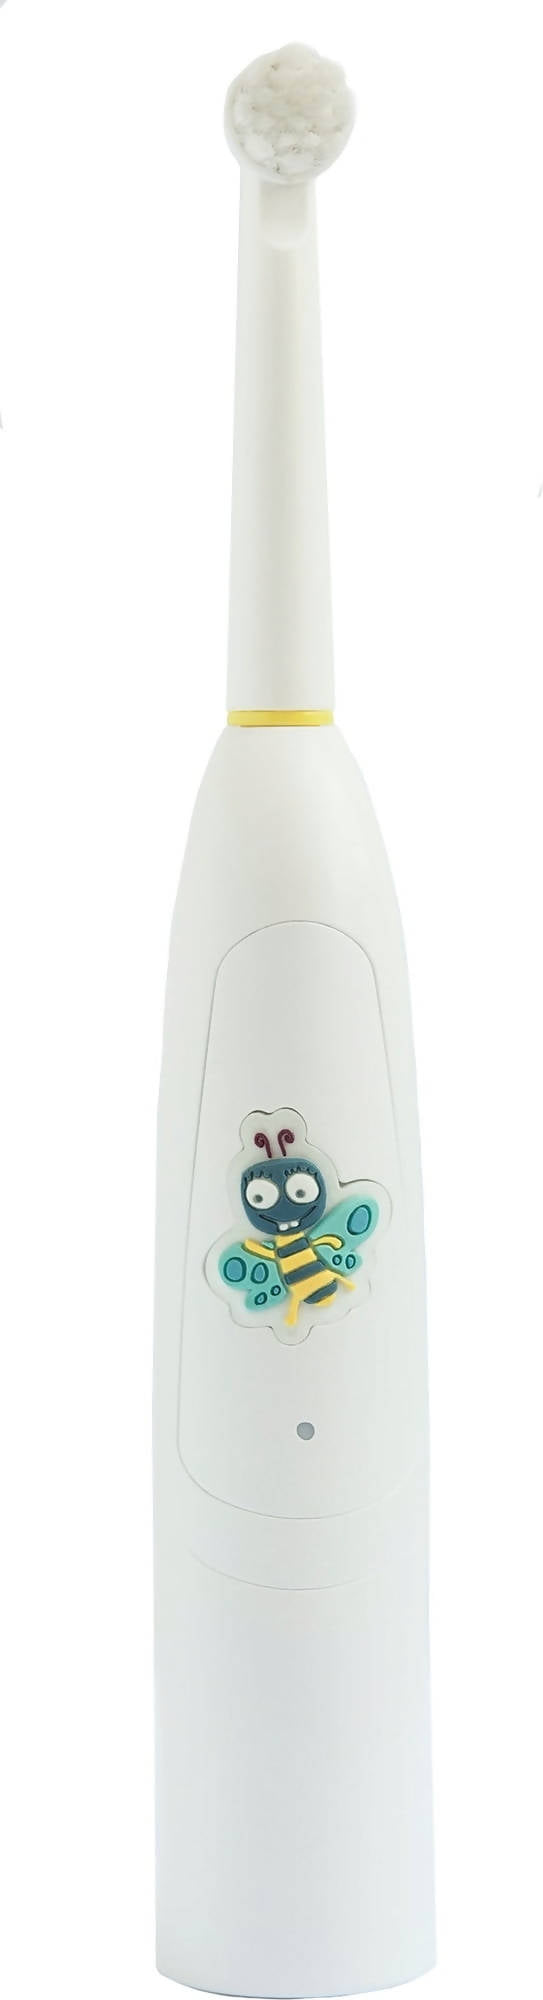 Jack N Jill Buzzy Musical Electric Toothbrush in Bahrain - Halabh